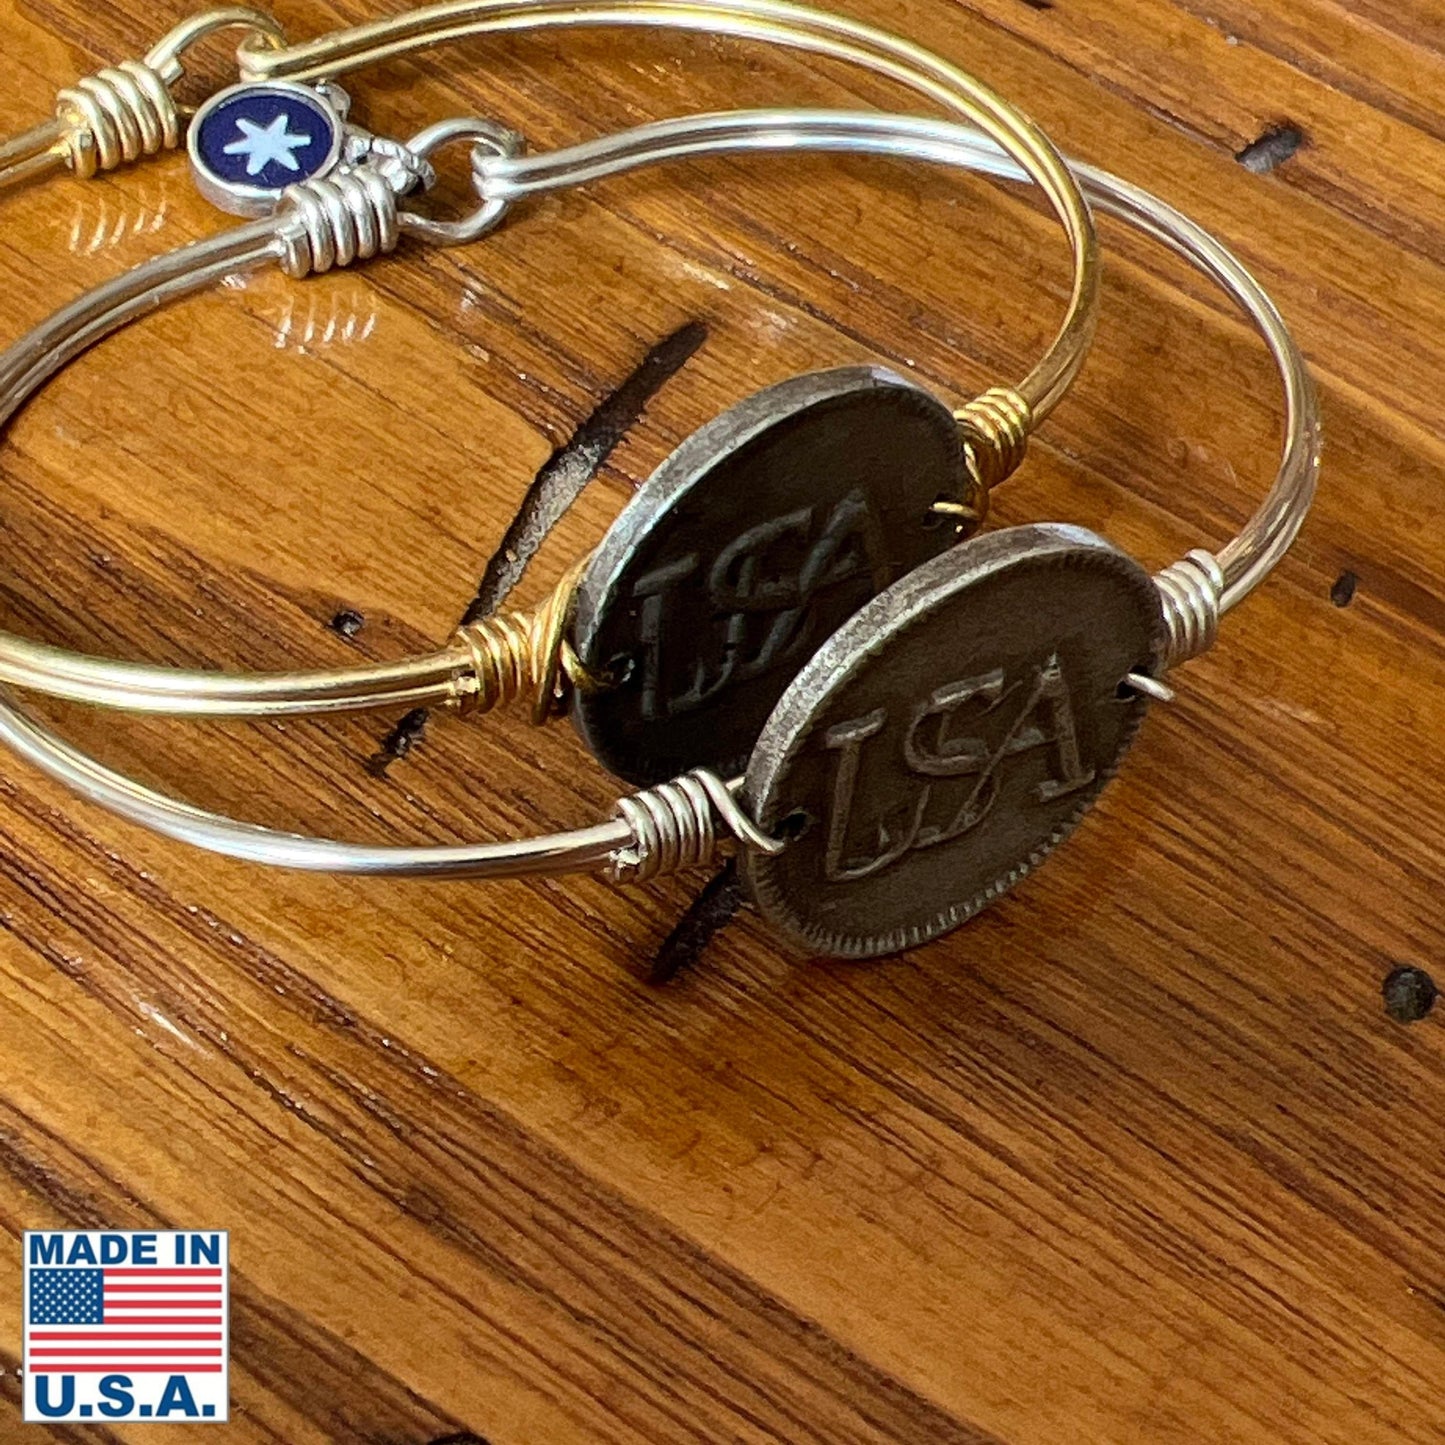 Valley Forge Bracelet — Made by hand in New England